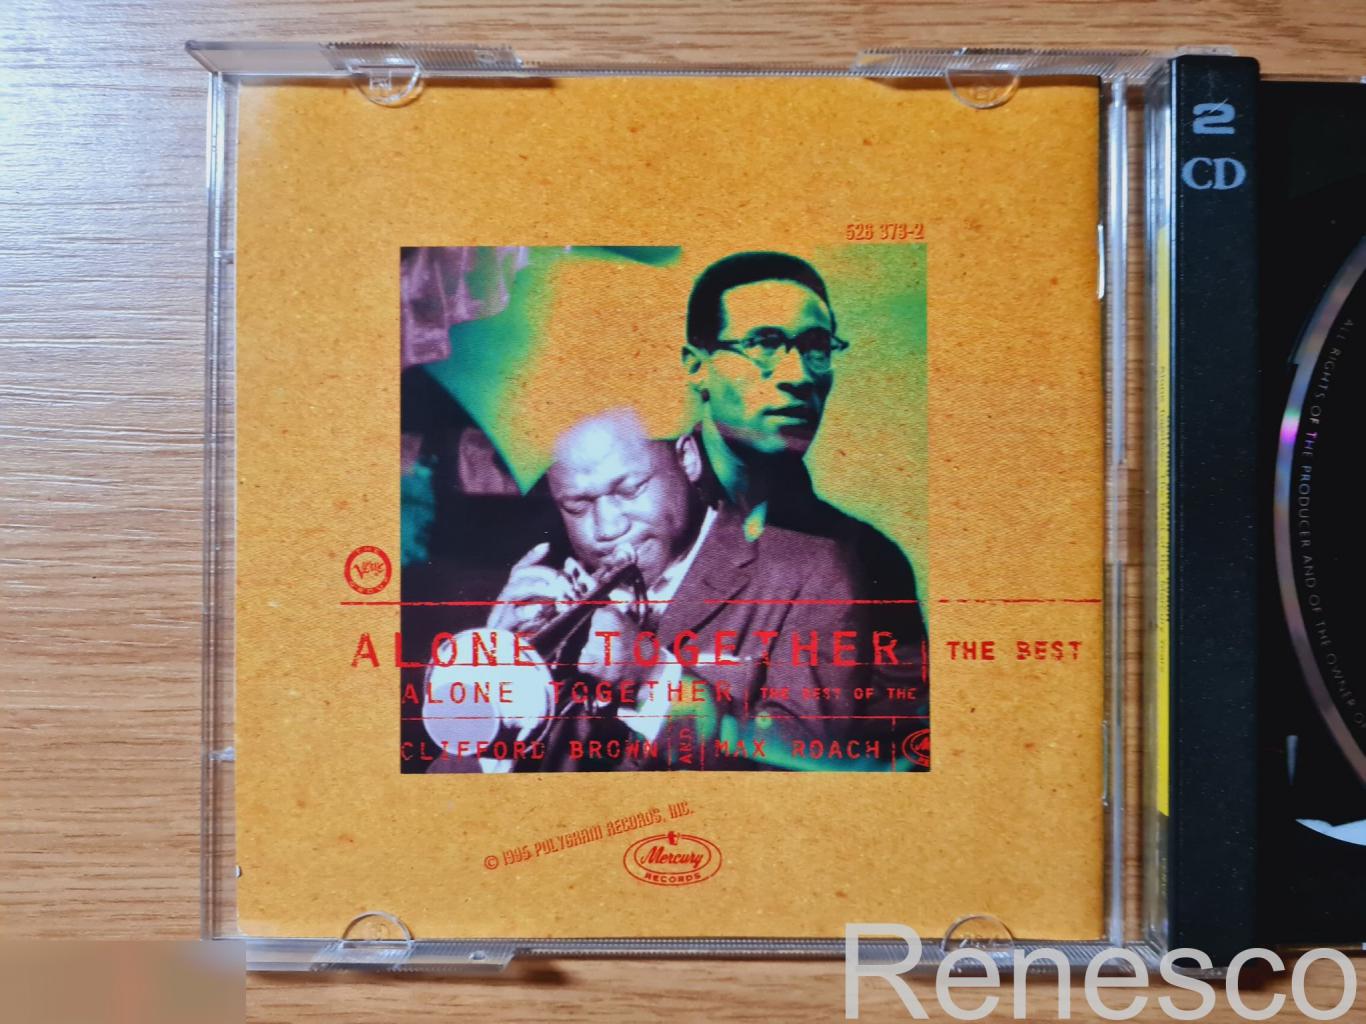 Clifford Brown And Max Roach – Alone Together: The Best Of The Mercury Years (Ge 4